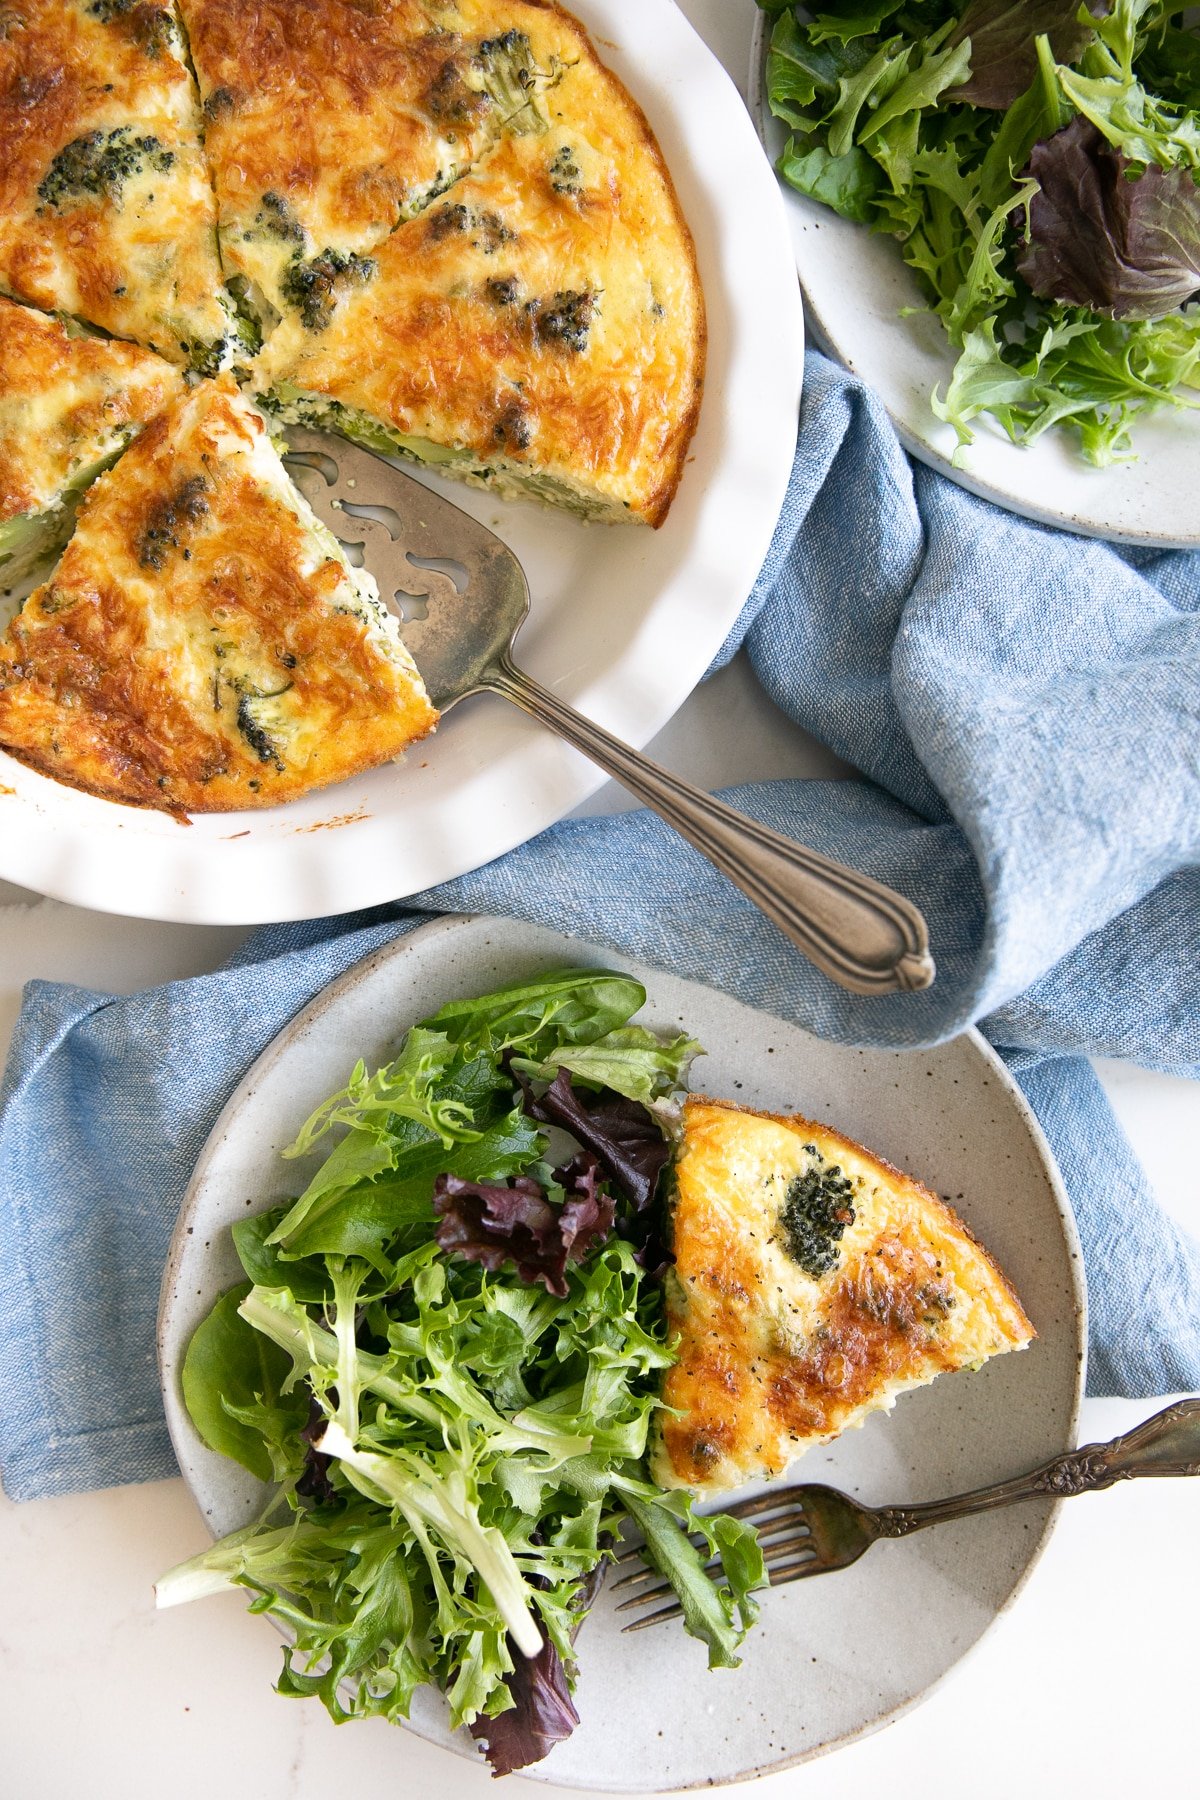 Overhead image of two serving plates filled with a slice of crustless quiche and a side of mixed greens, a blue tea towel, and a white pie dish filled with the remaining quiche.